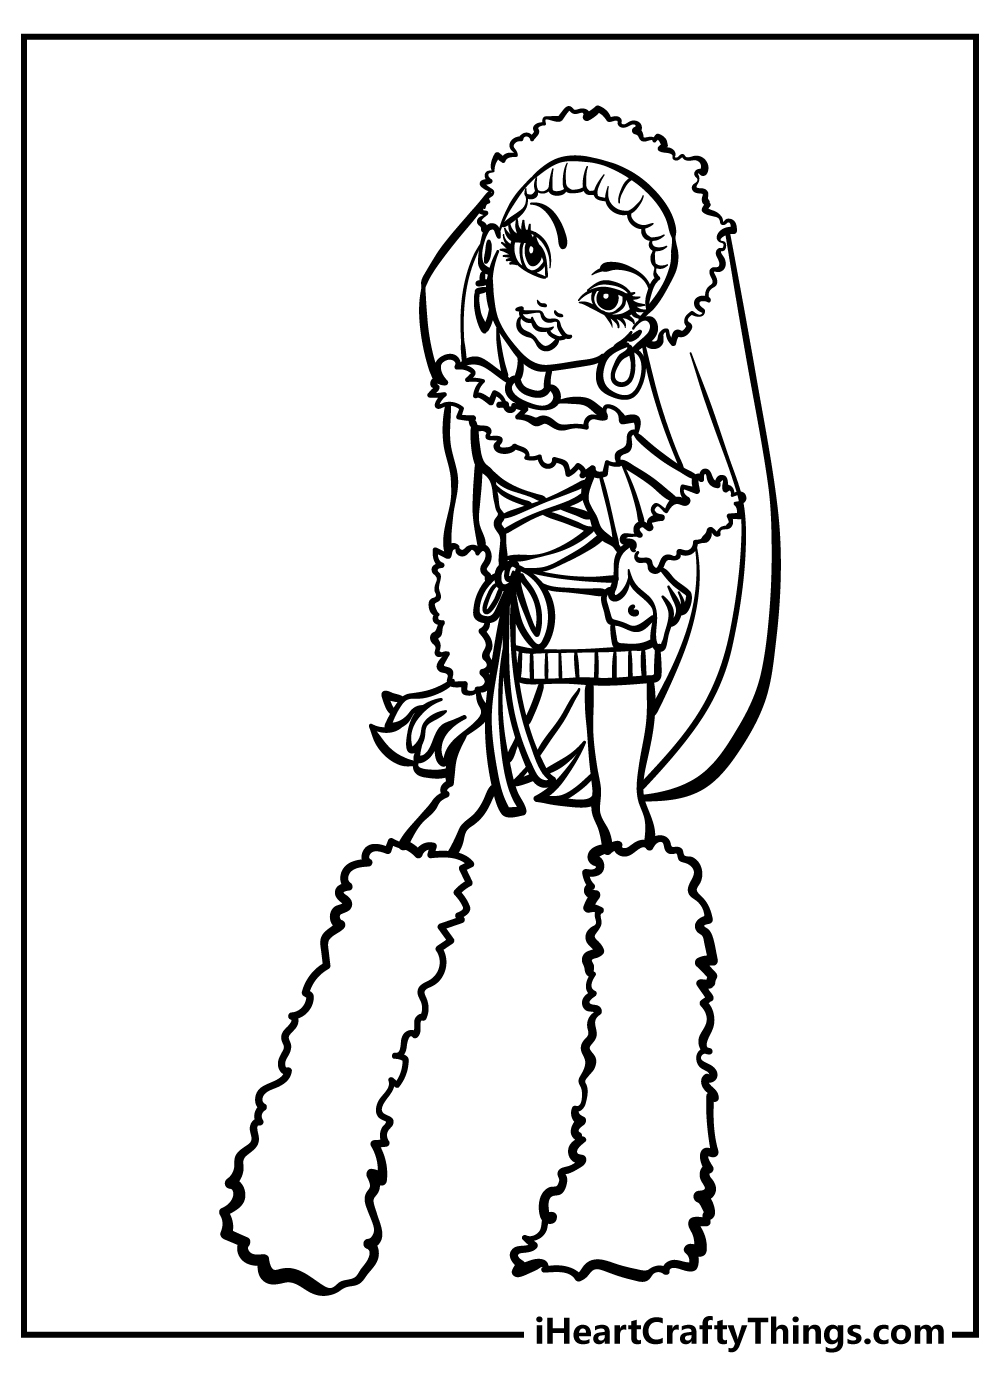 Monster High Coloring Sheet for children free download